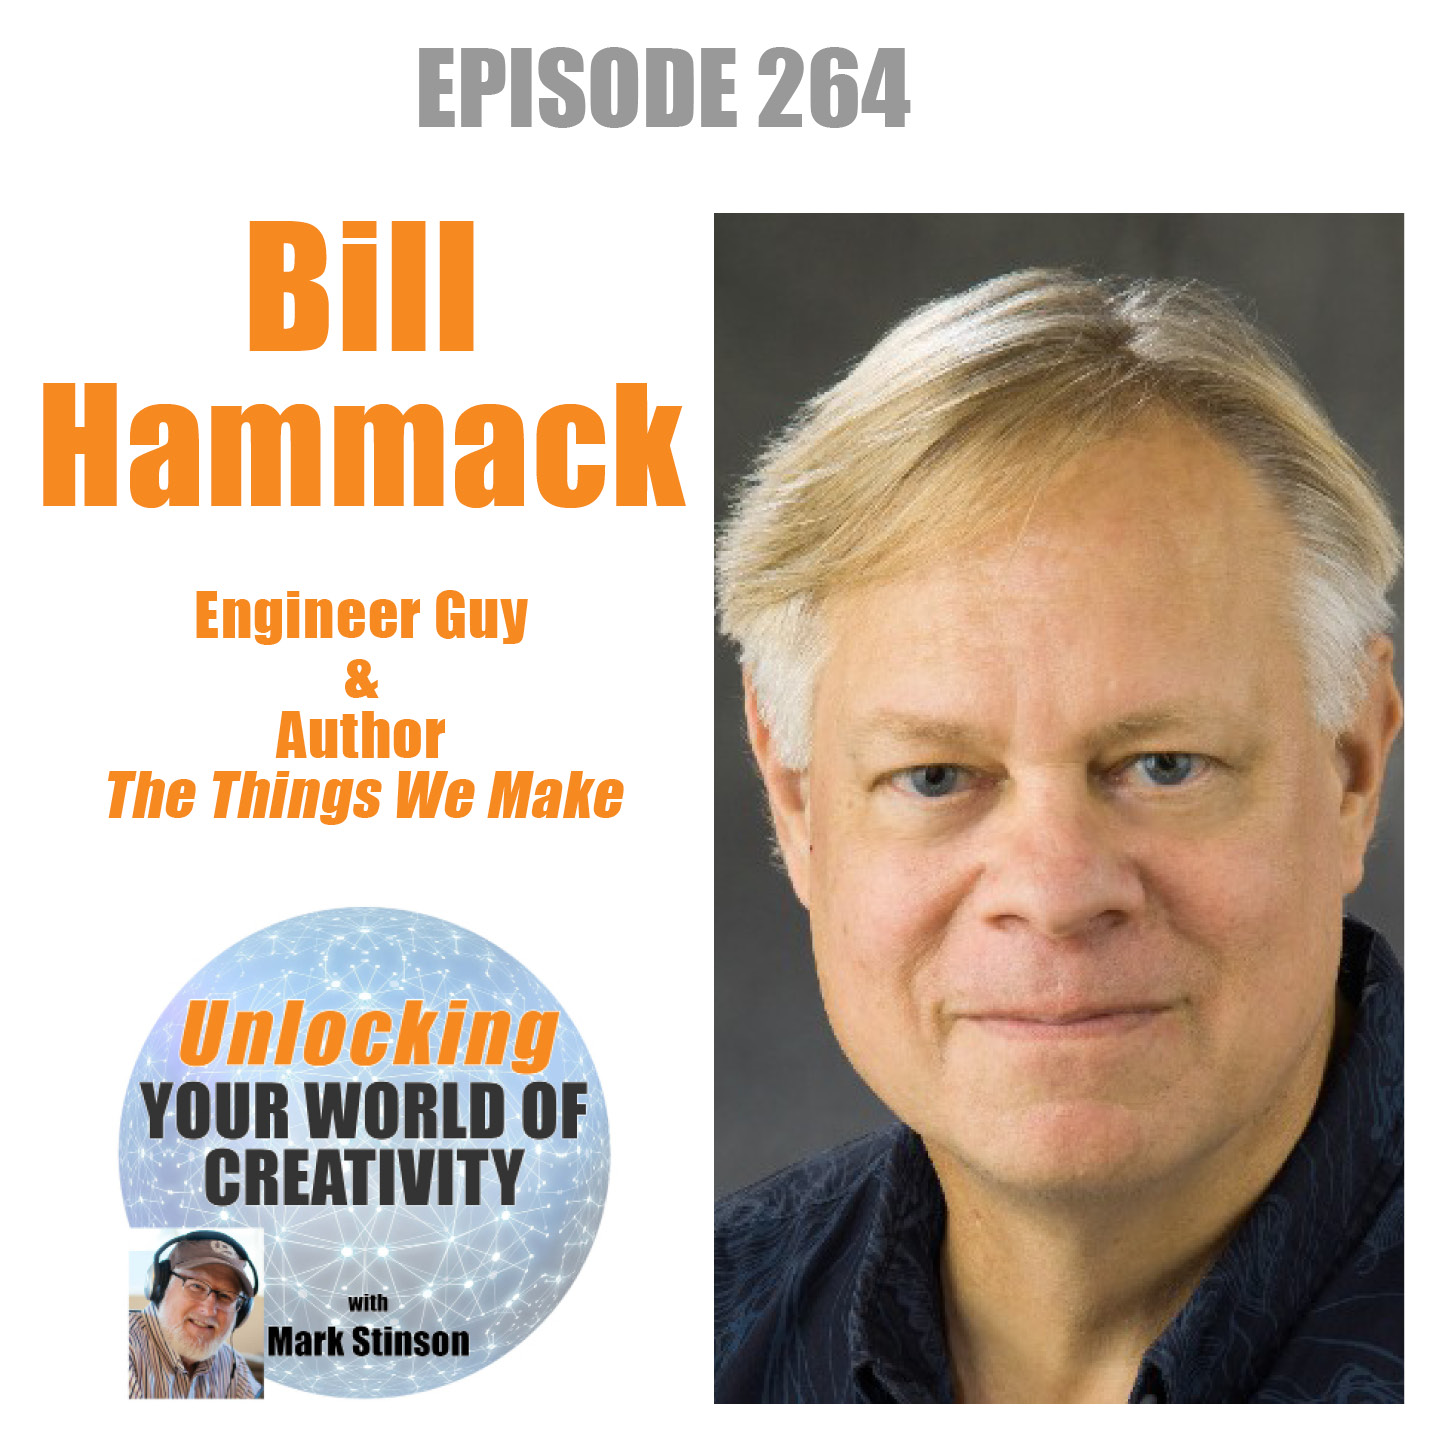 Bill Hammack, The Engineering Guy and author “The Things We Make”